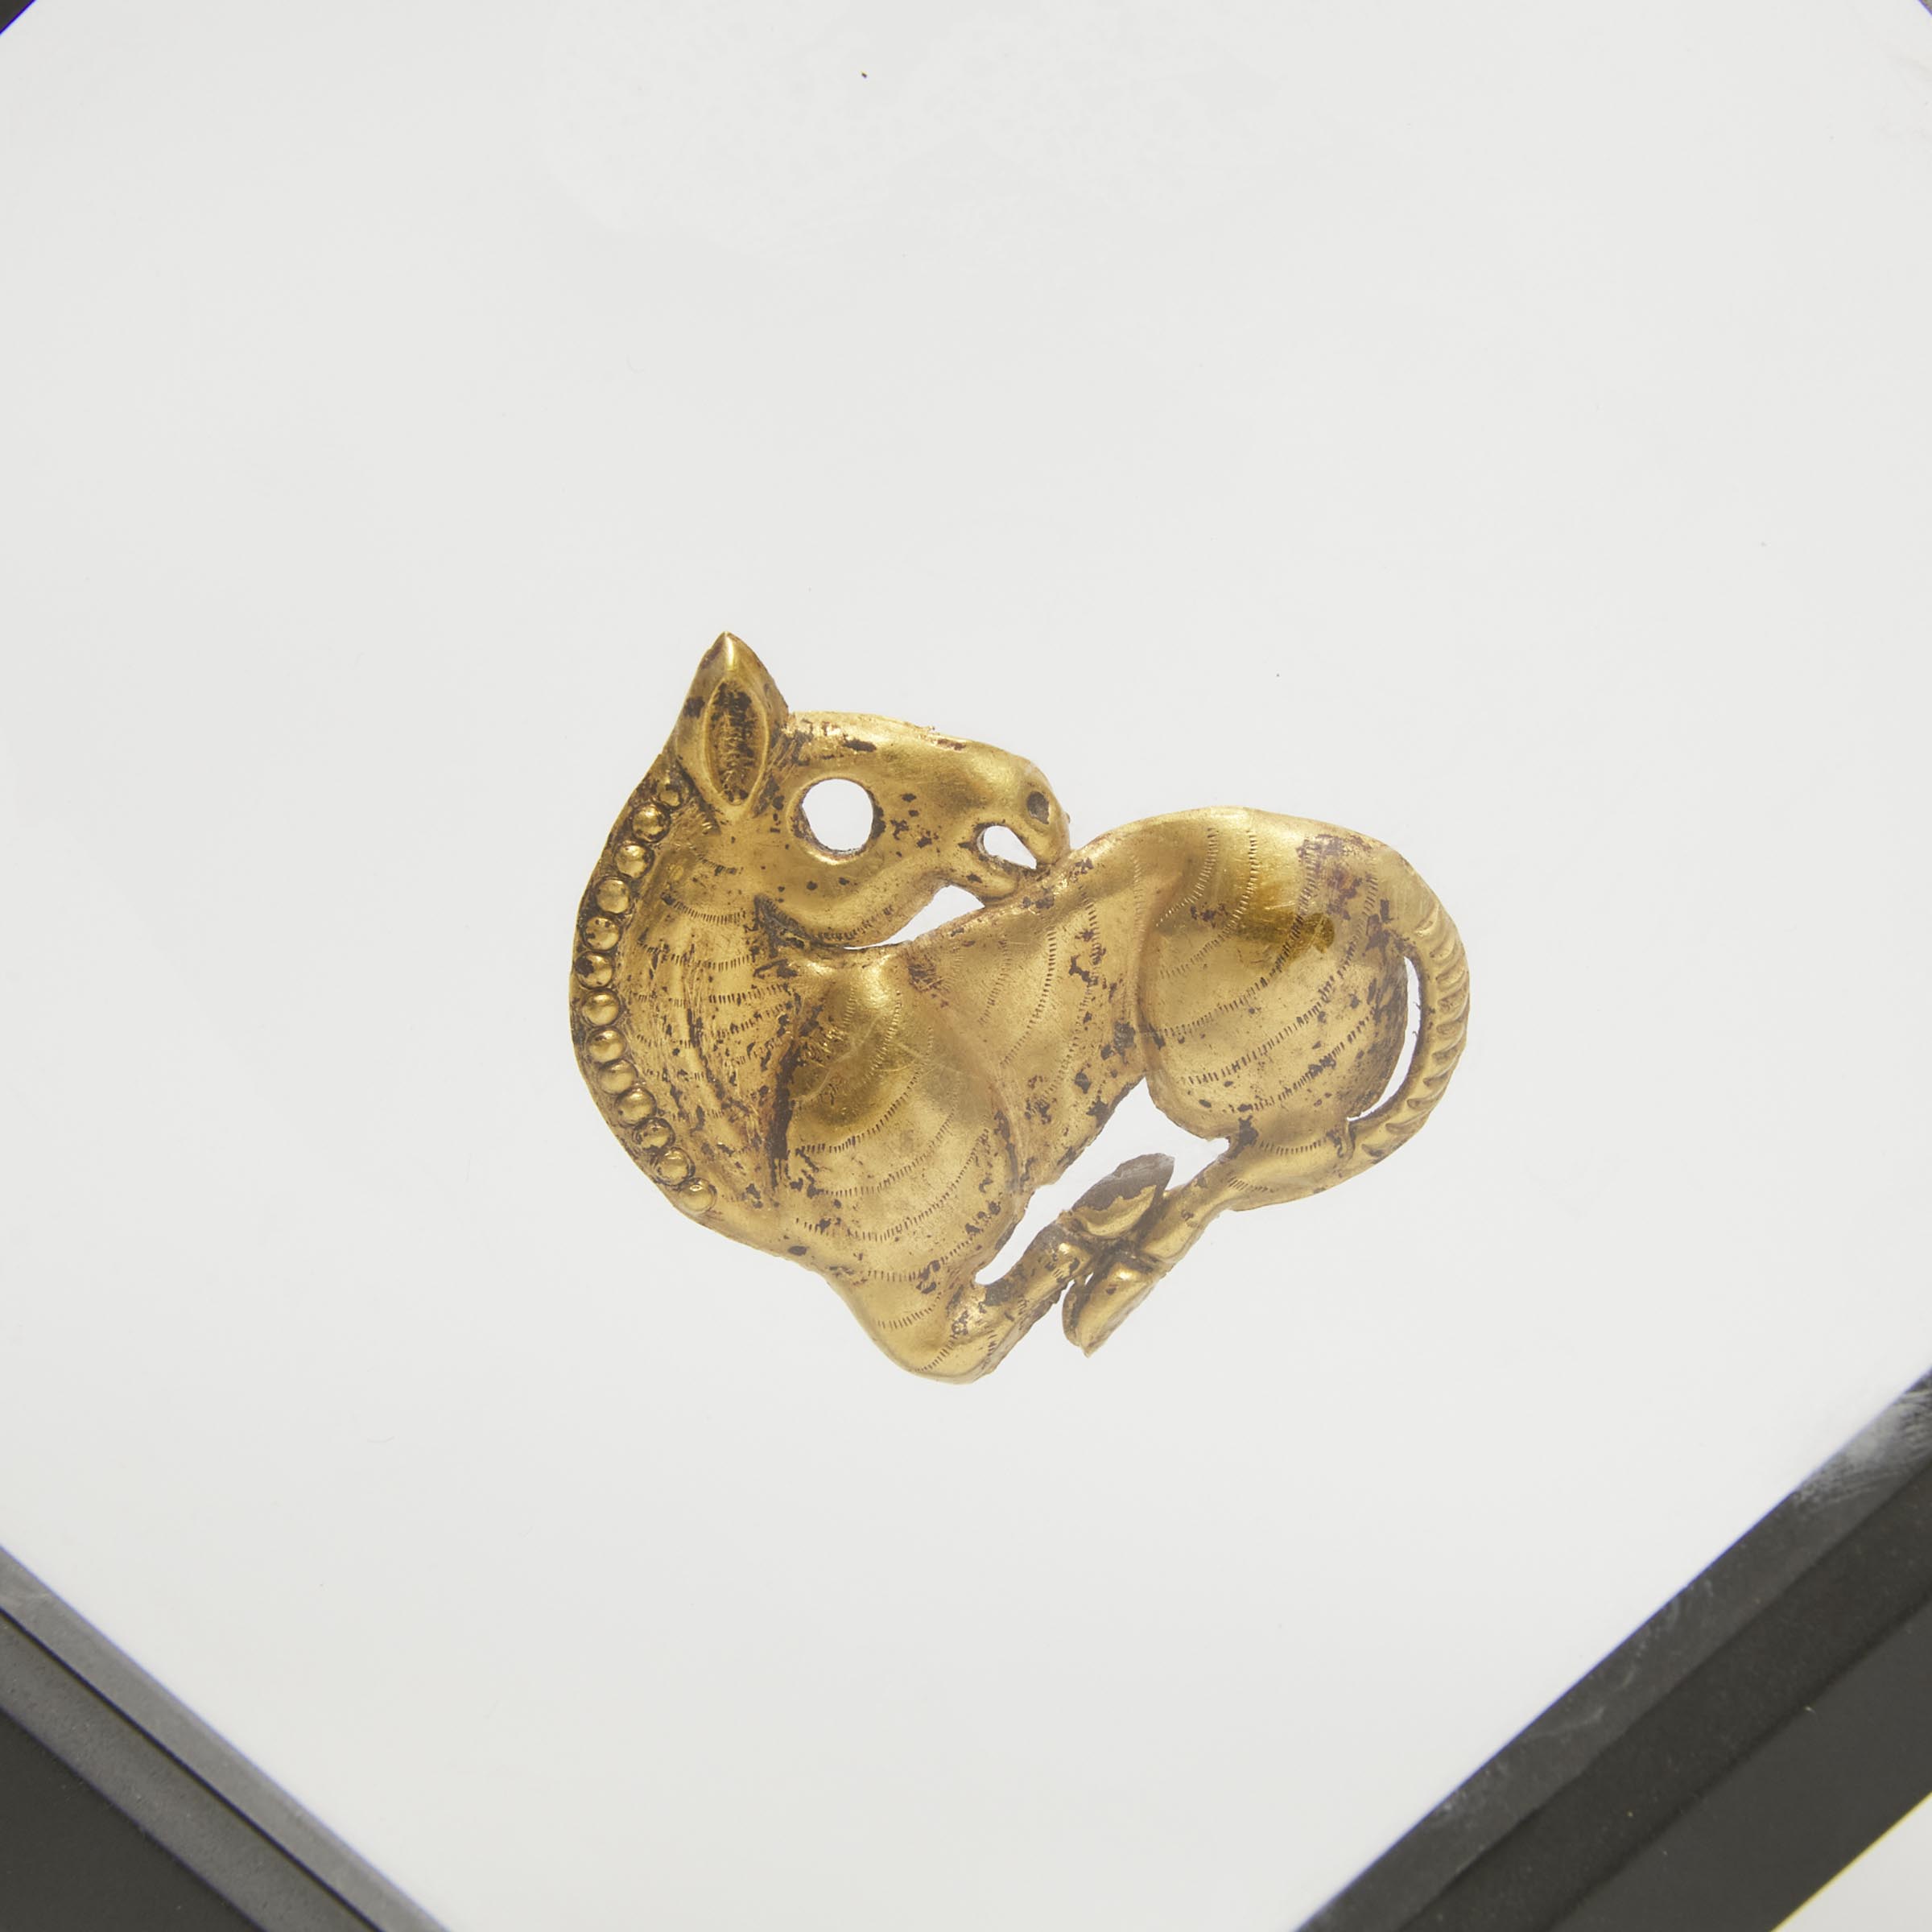 A Rare Solid Gold Horse Pendant Amulet, Ordos Region, Warring States Period (475-221 BC)